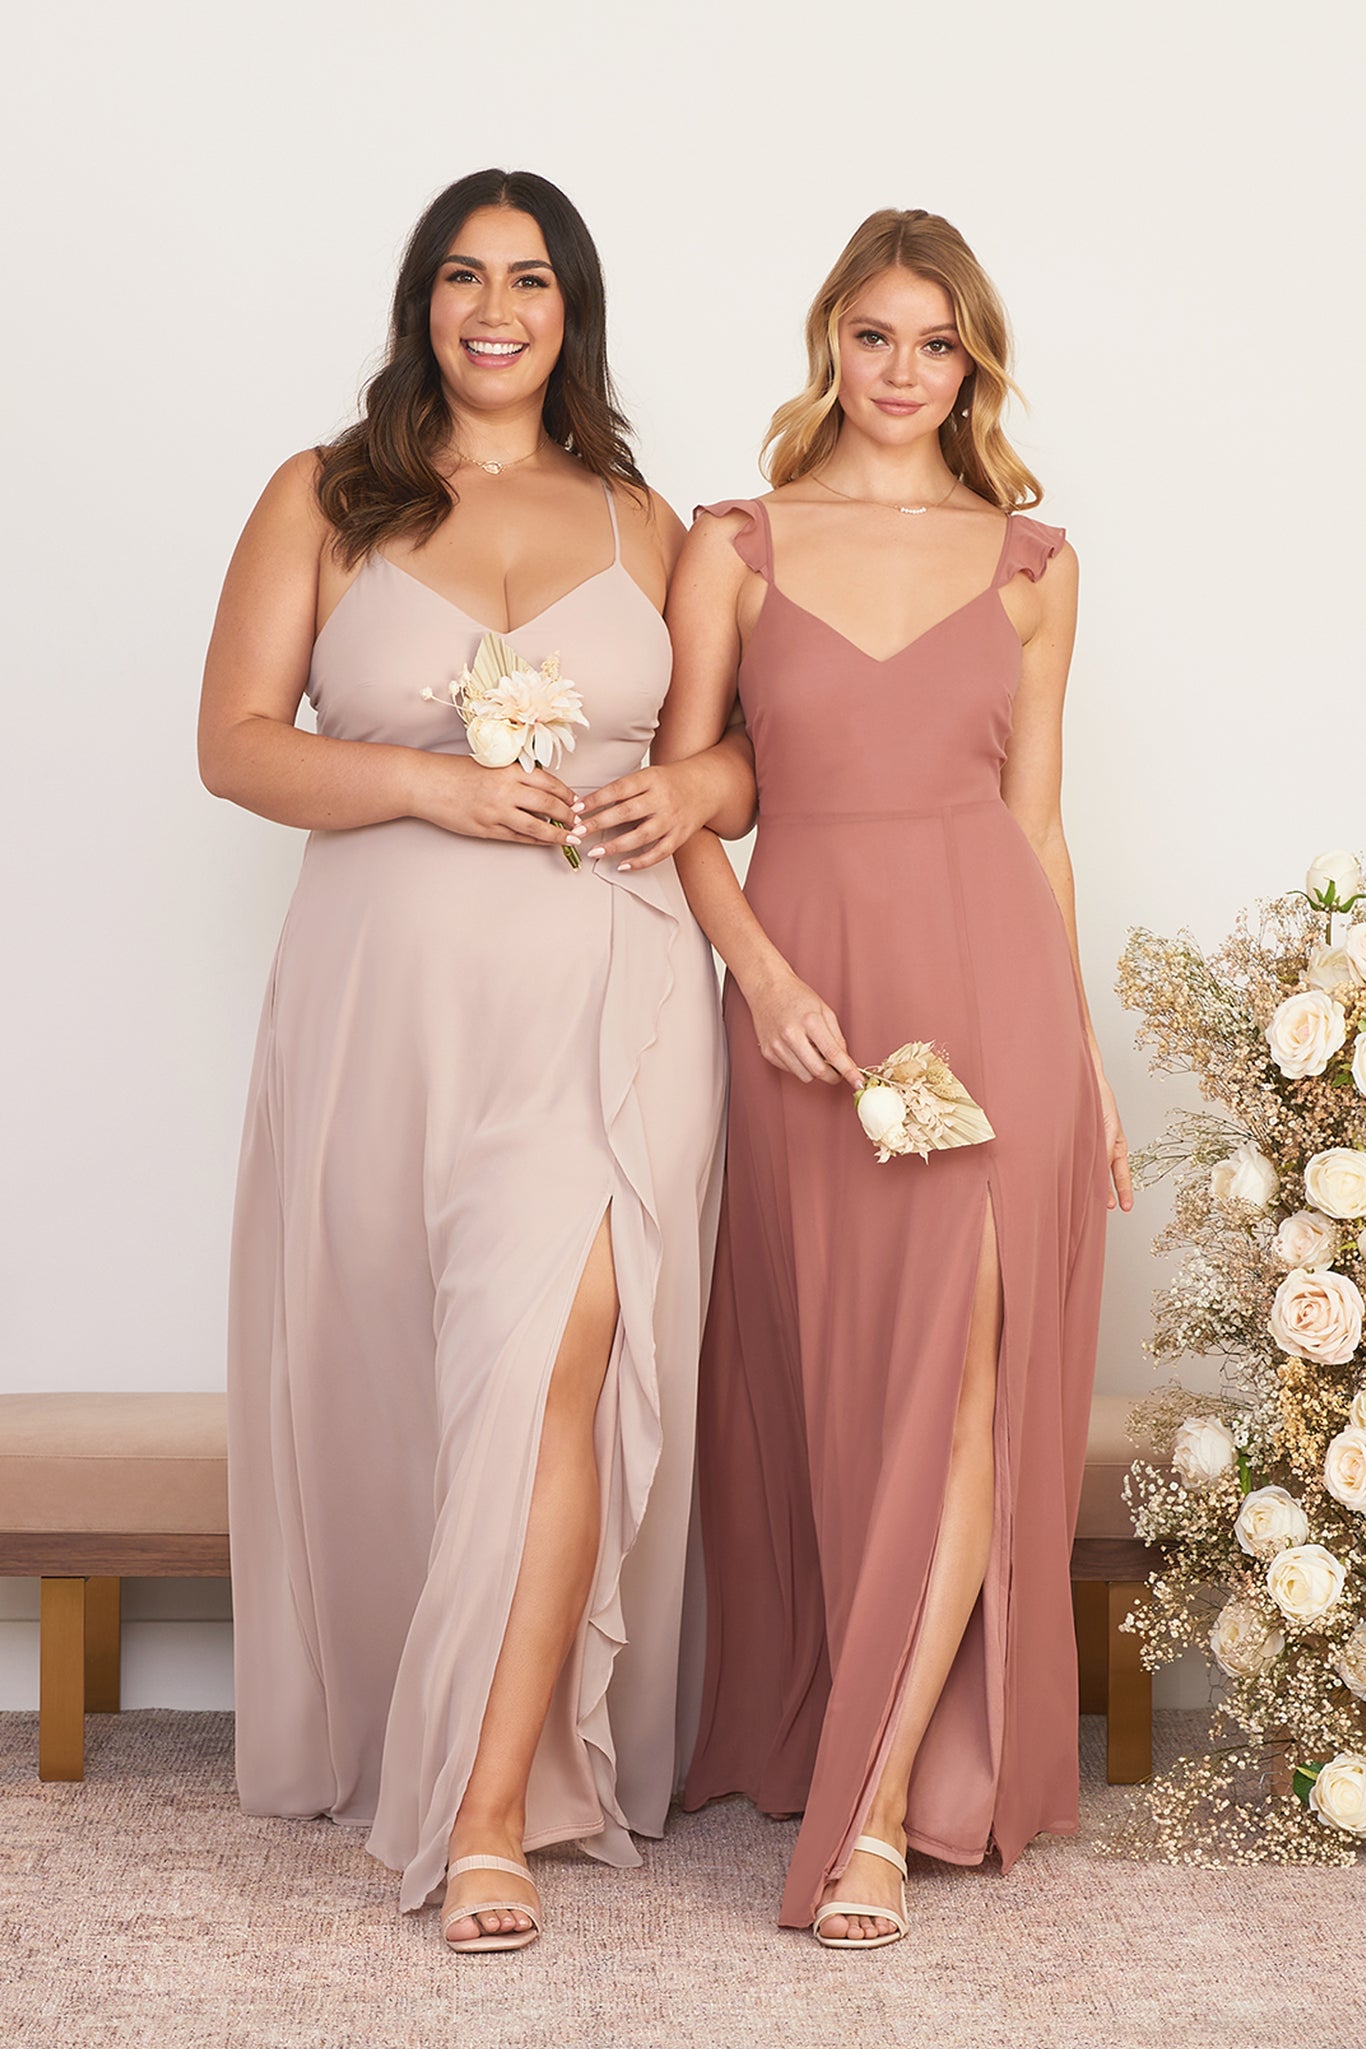 Front view of two models wearing coordinating floor length dresses with slits. The Theresa Dress Curve is worn by full figured model with a light skin tone in taupe chiffon. The second dress is worn by a slender model with a light skin tone in desert rose. 